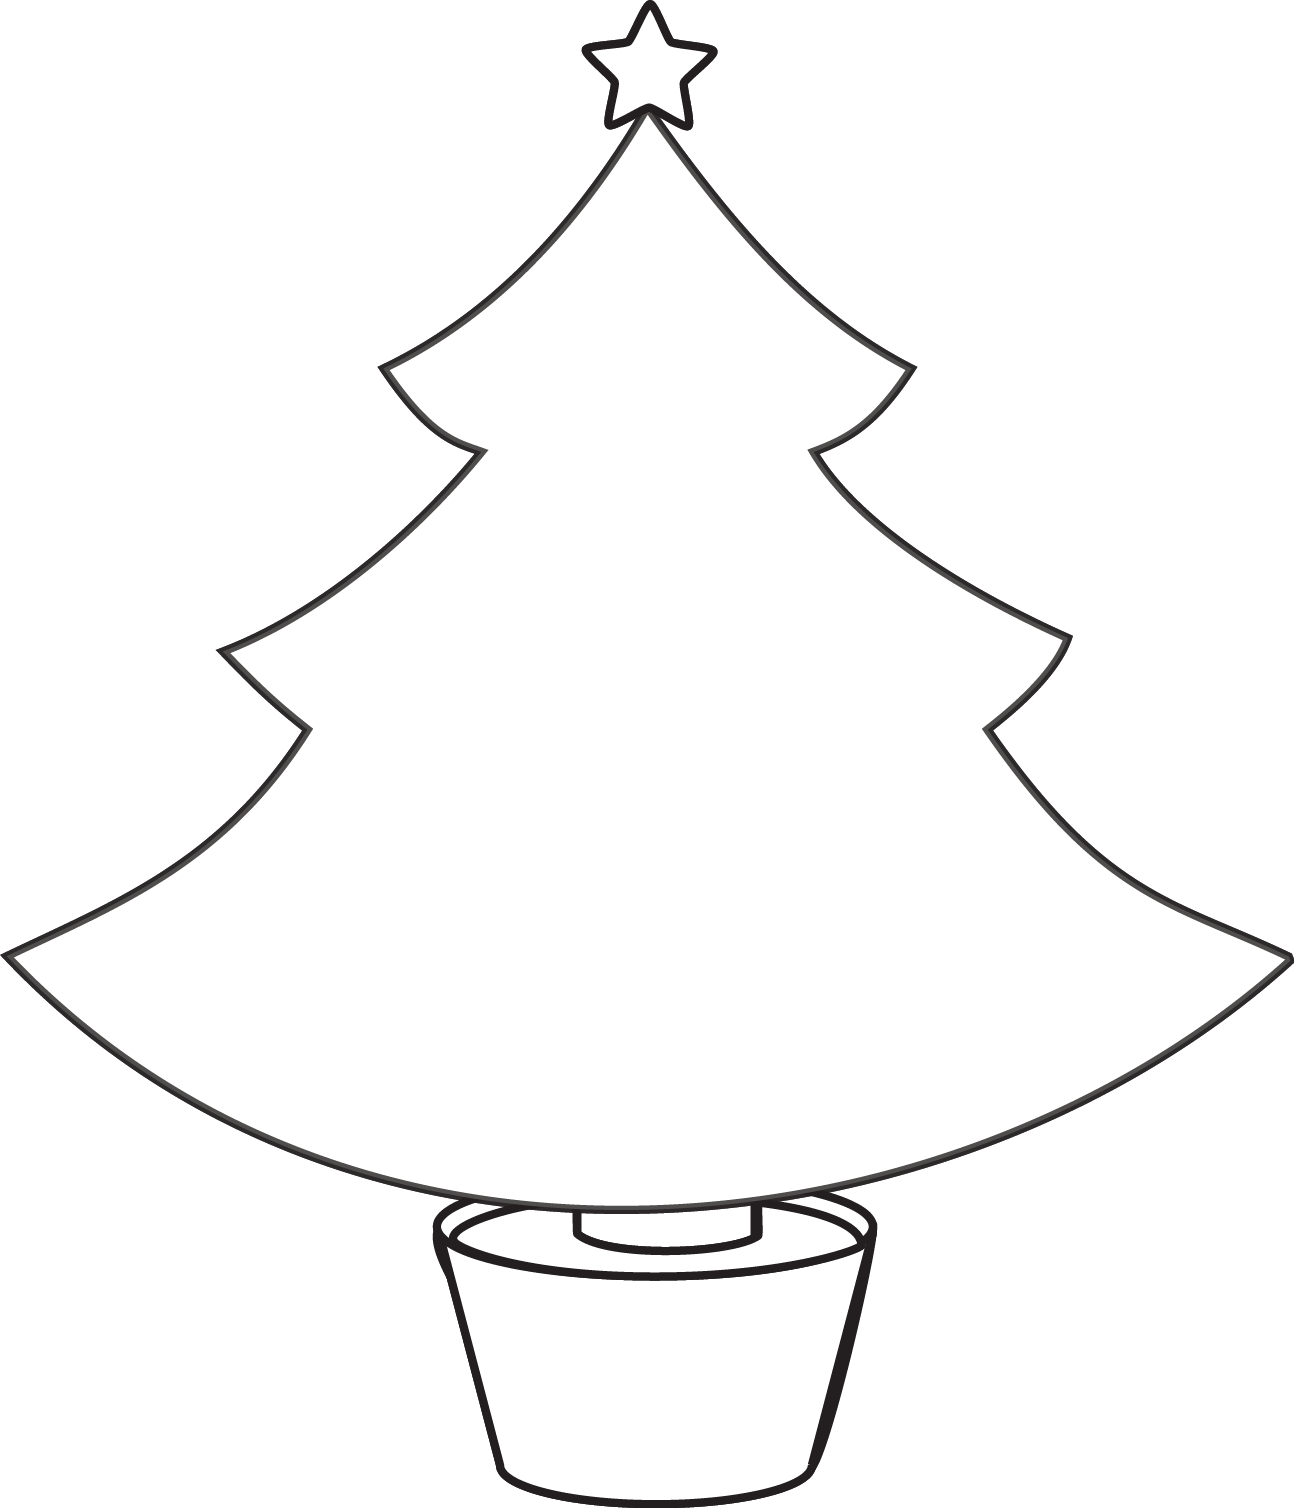 Christmas Tree Images Black And White | Free download on ClipArtMag